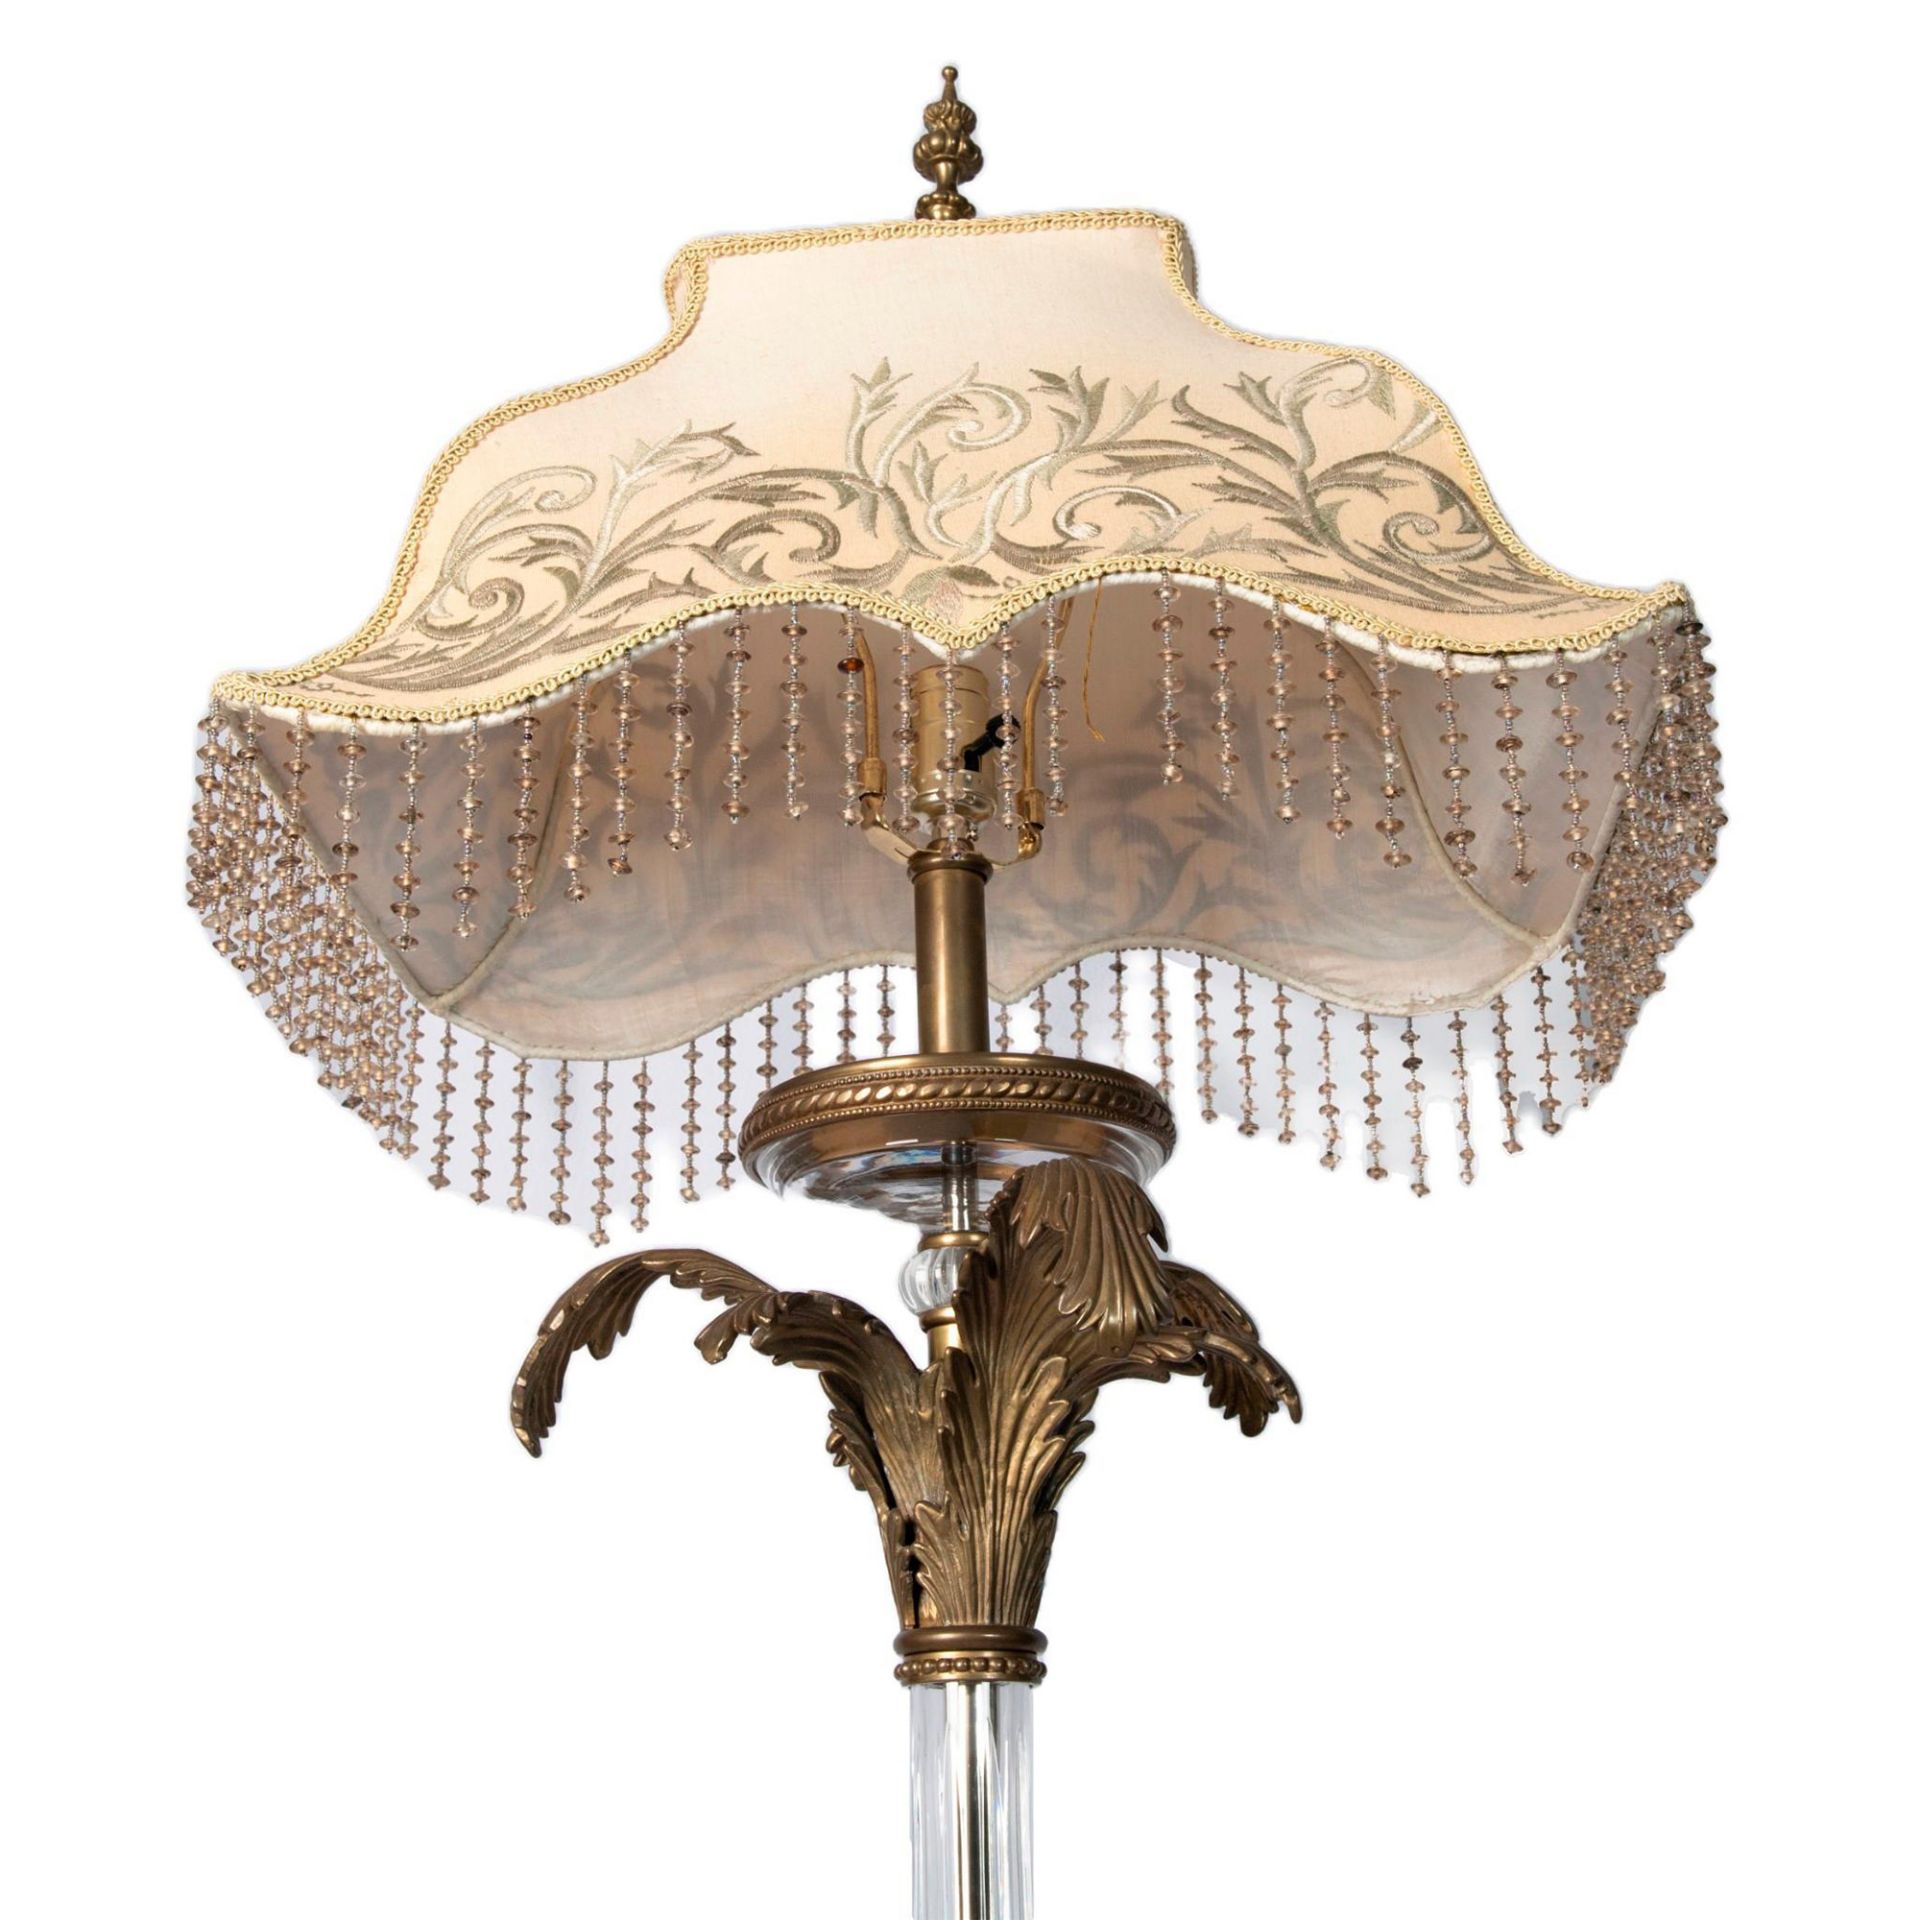 Baroque Style Brass and Glass Ornate Floor Lamp - Image 5 of 9